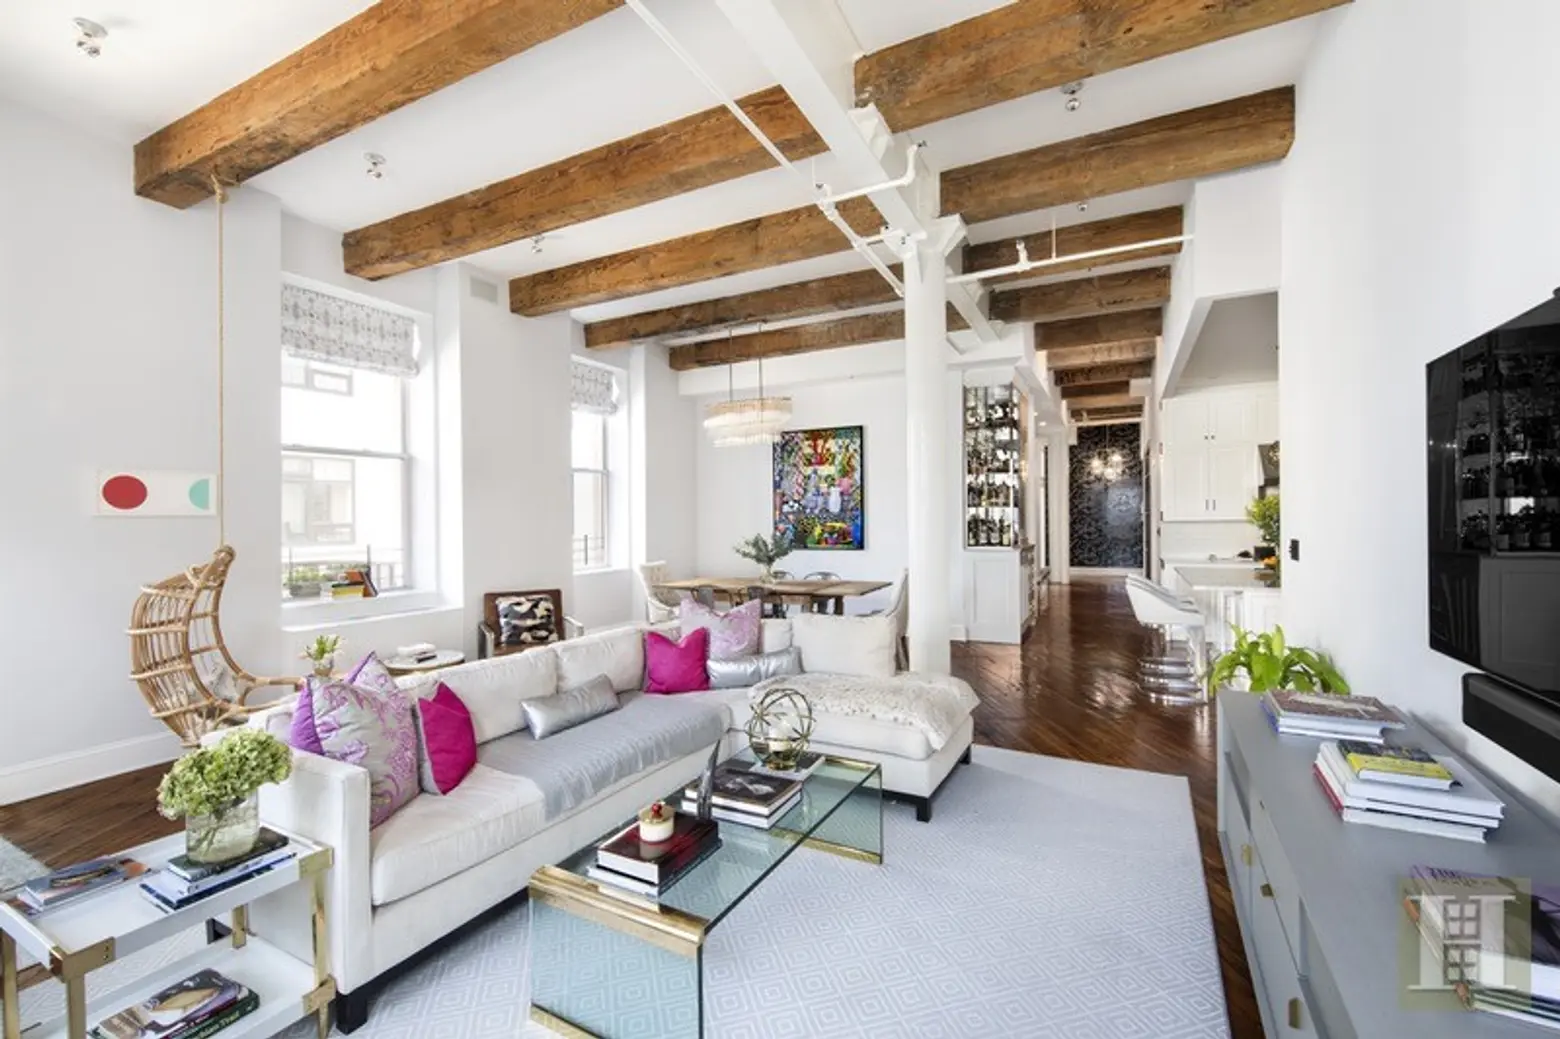 An upscale renovation transformed this $3.75M Williamsburg loft with a dramatic wall of glass